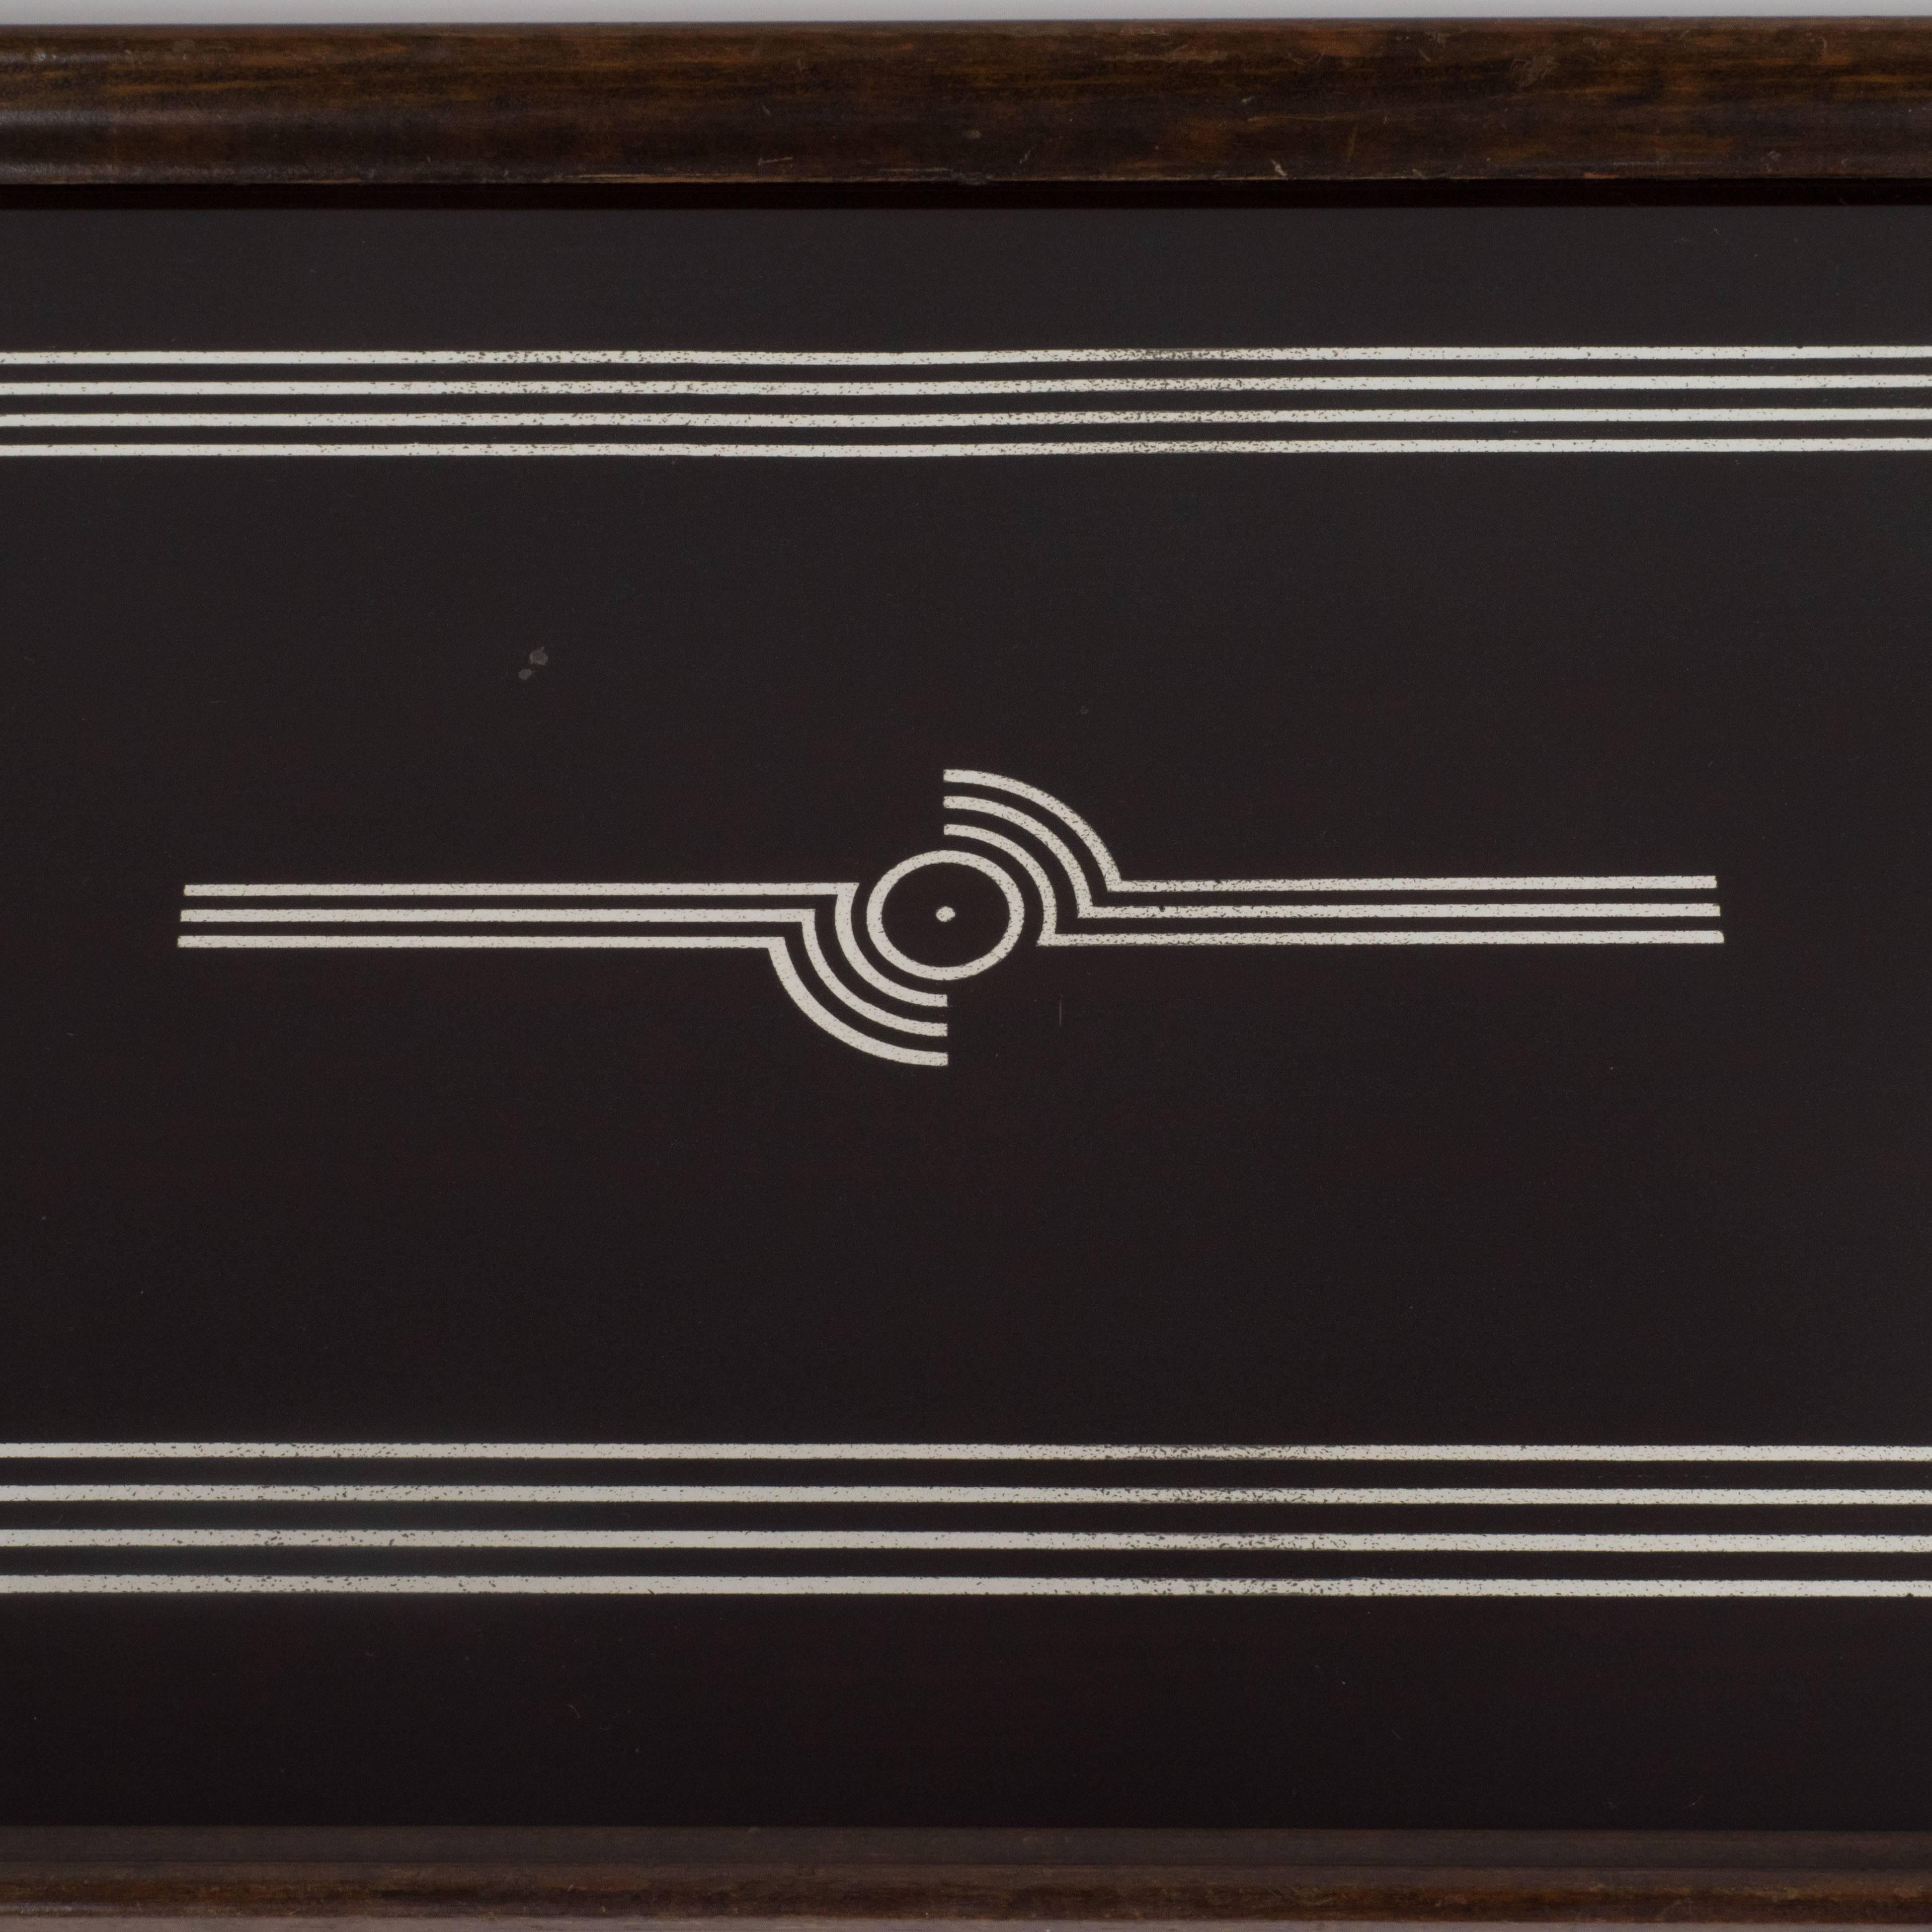 This elegant tray features glass hand-painted geometric streamlined designs in sterling silver over an ebonized walnut body. The perimeter body has been executed in hand rubbed walnut with pentagonal handles of the same material. This is a beautiful